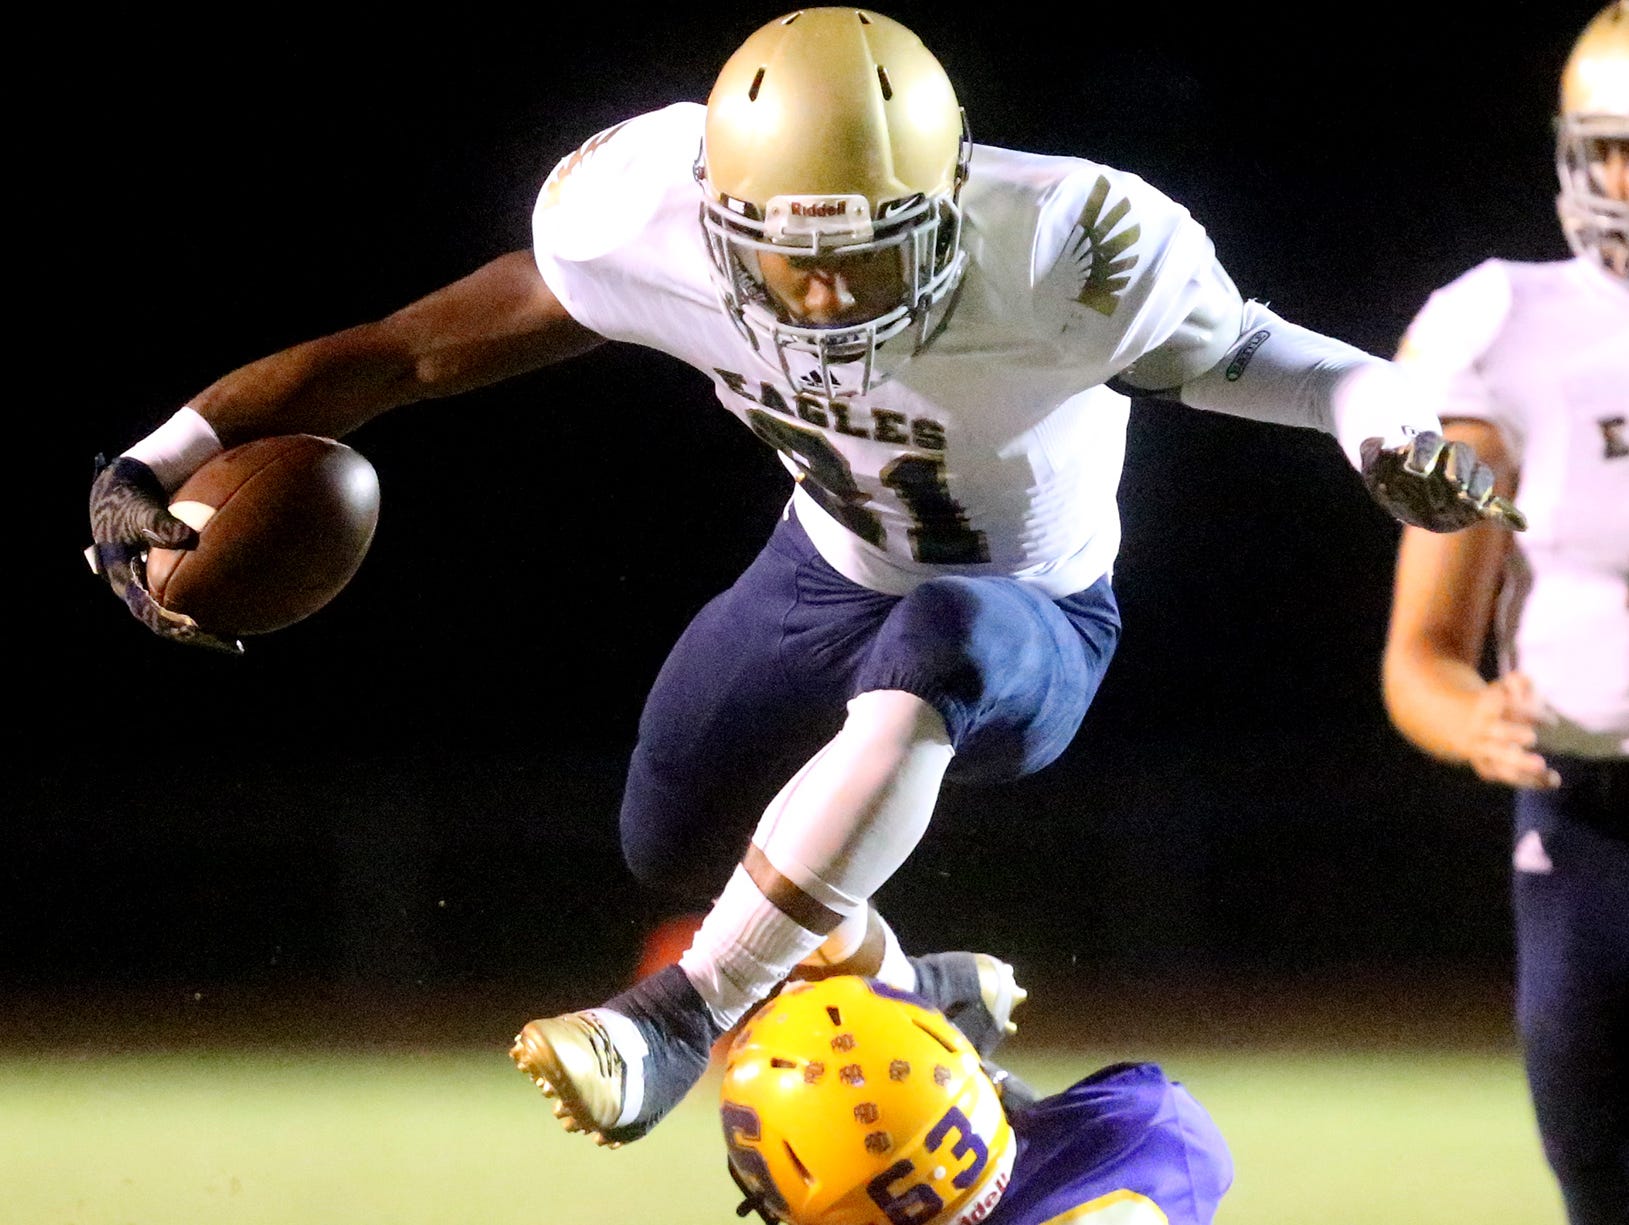 Independence's Troy Henderson (21) hurdles over players as he runs the ball during the game against Smyrna.